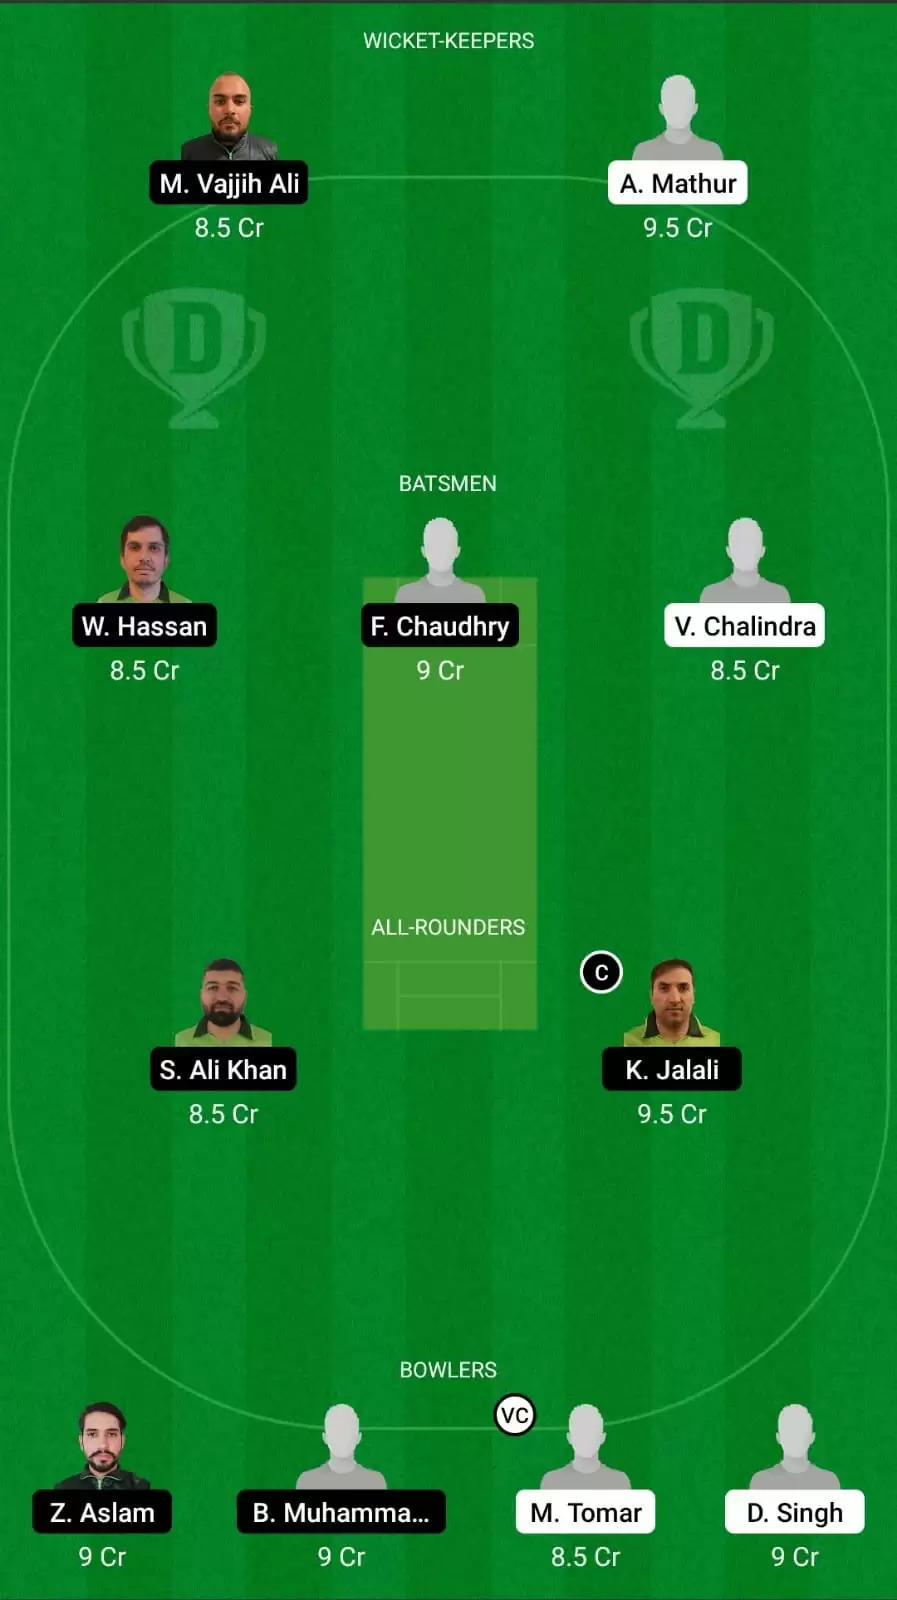 STO vs PF Dream11 Prediction for ECS T10 Sweden 2021: Stockholm vs Pakistanska Forening Best Fantasy Cricket Tips, Strongest Playing XI, Pitch Report and Player Updates